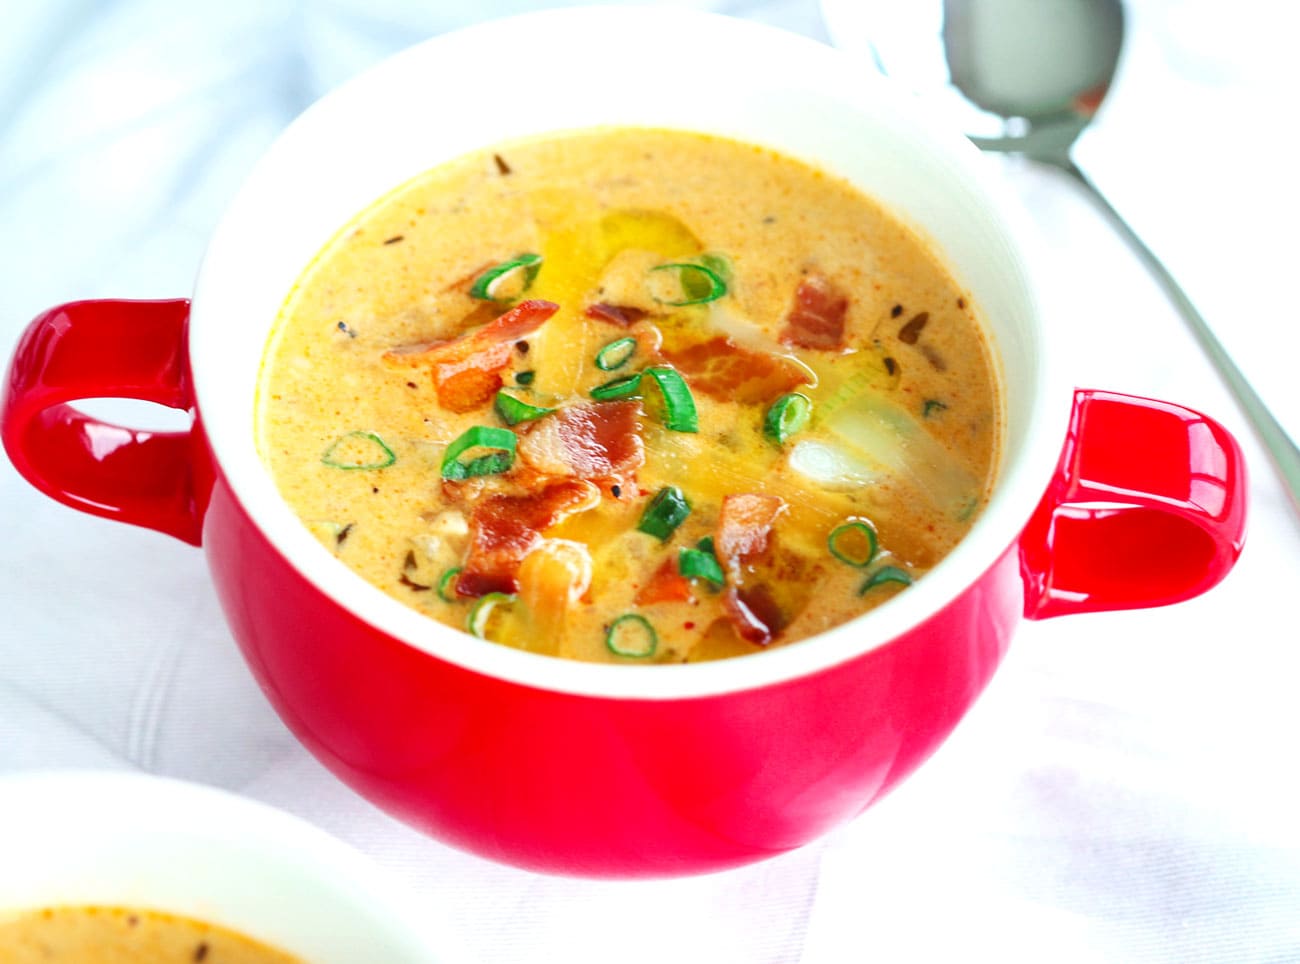 Kicked Up Creamy Clam Chowder - That Spicy Chick